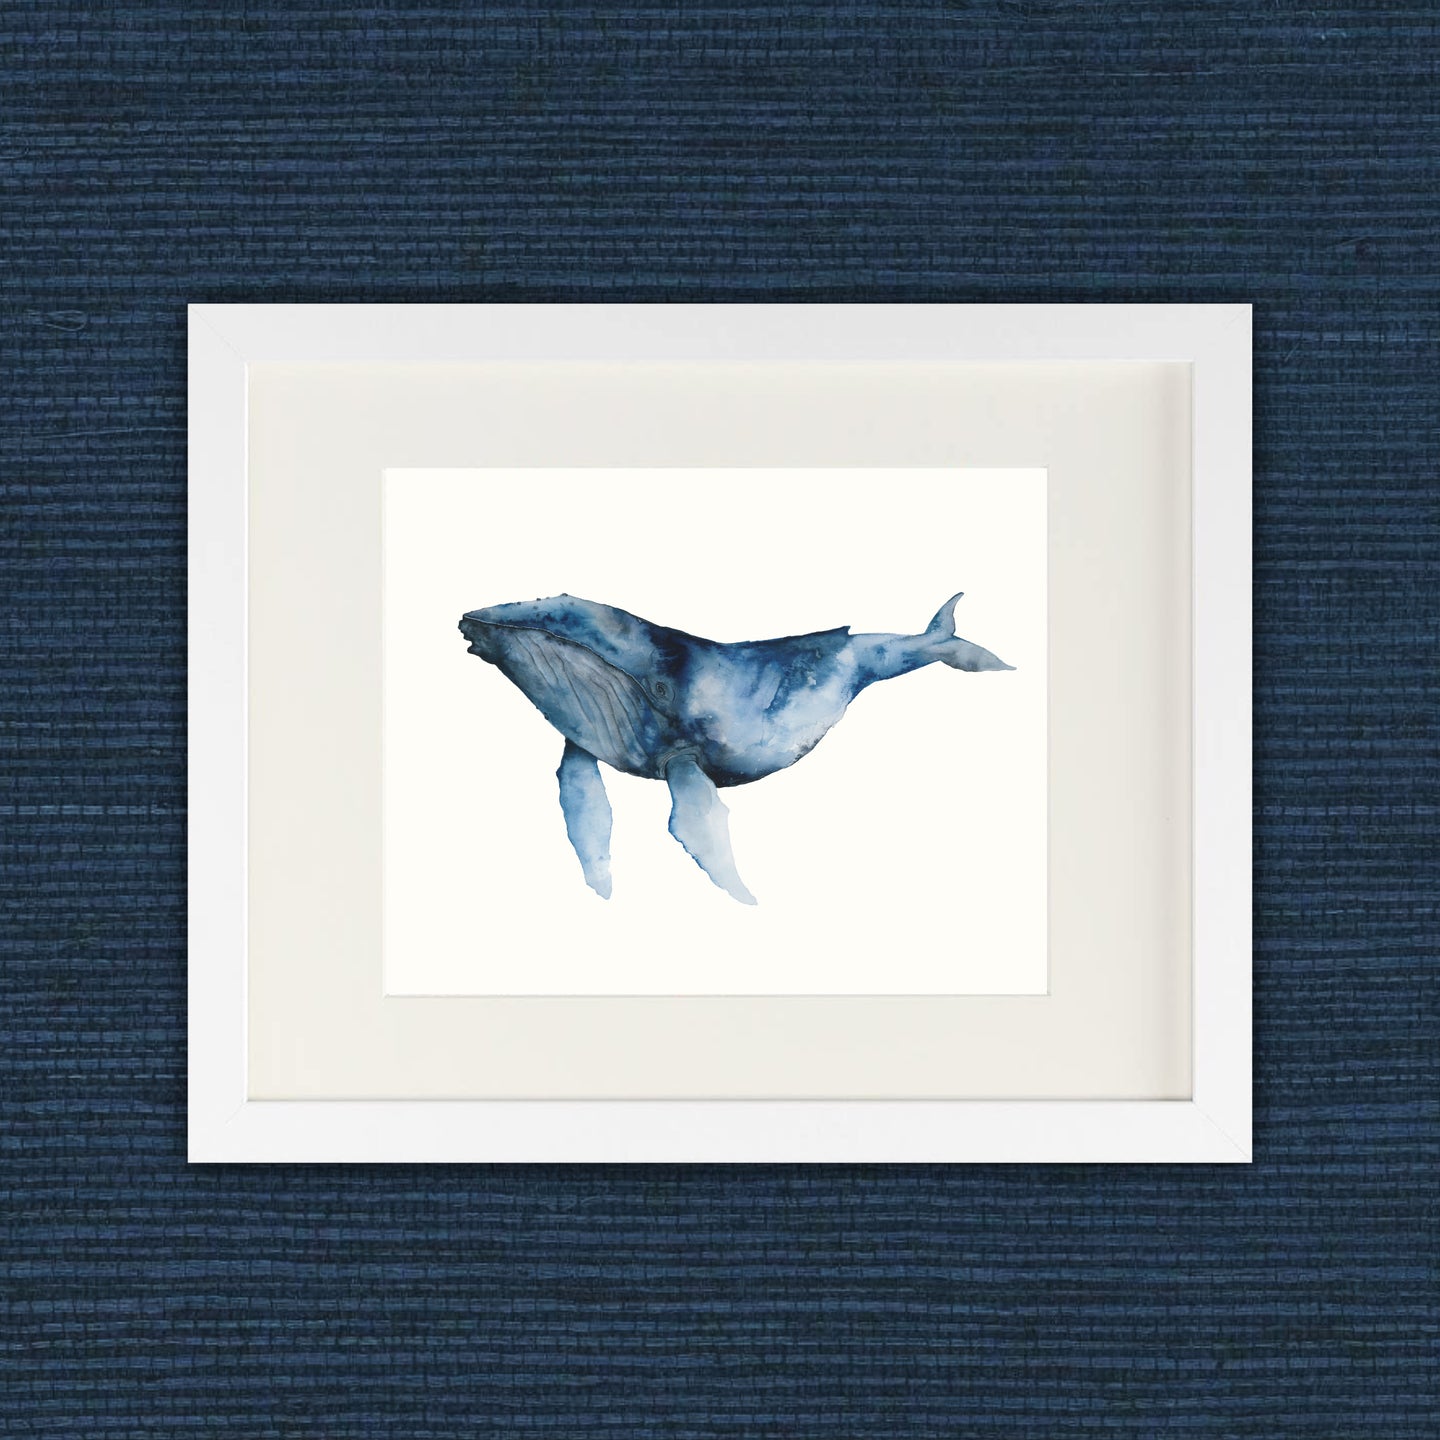 “Grace of Being” Fine Art Print - Humpback Whale (2019)